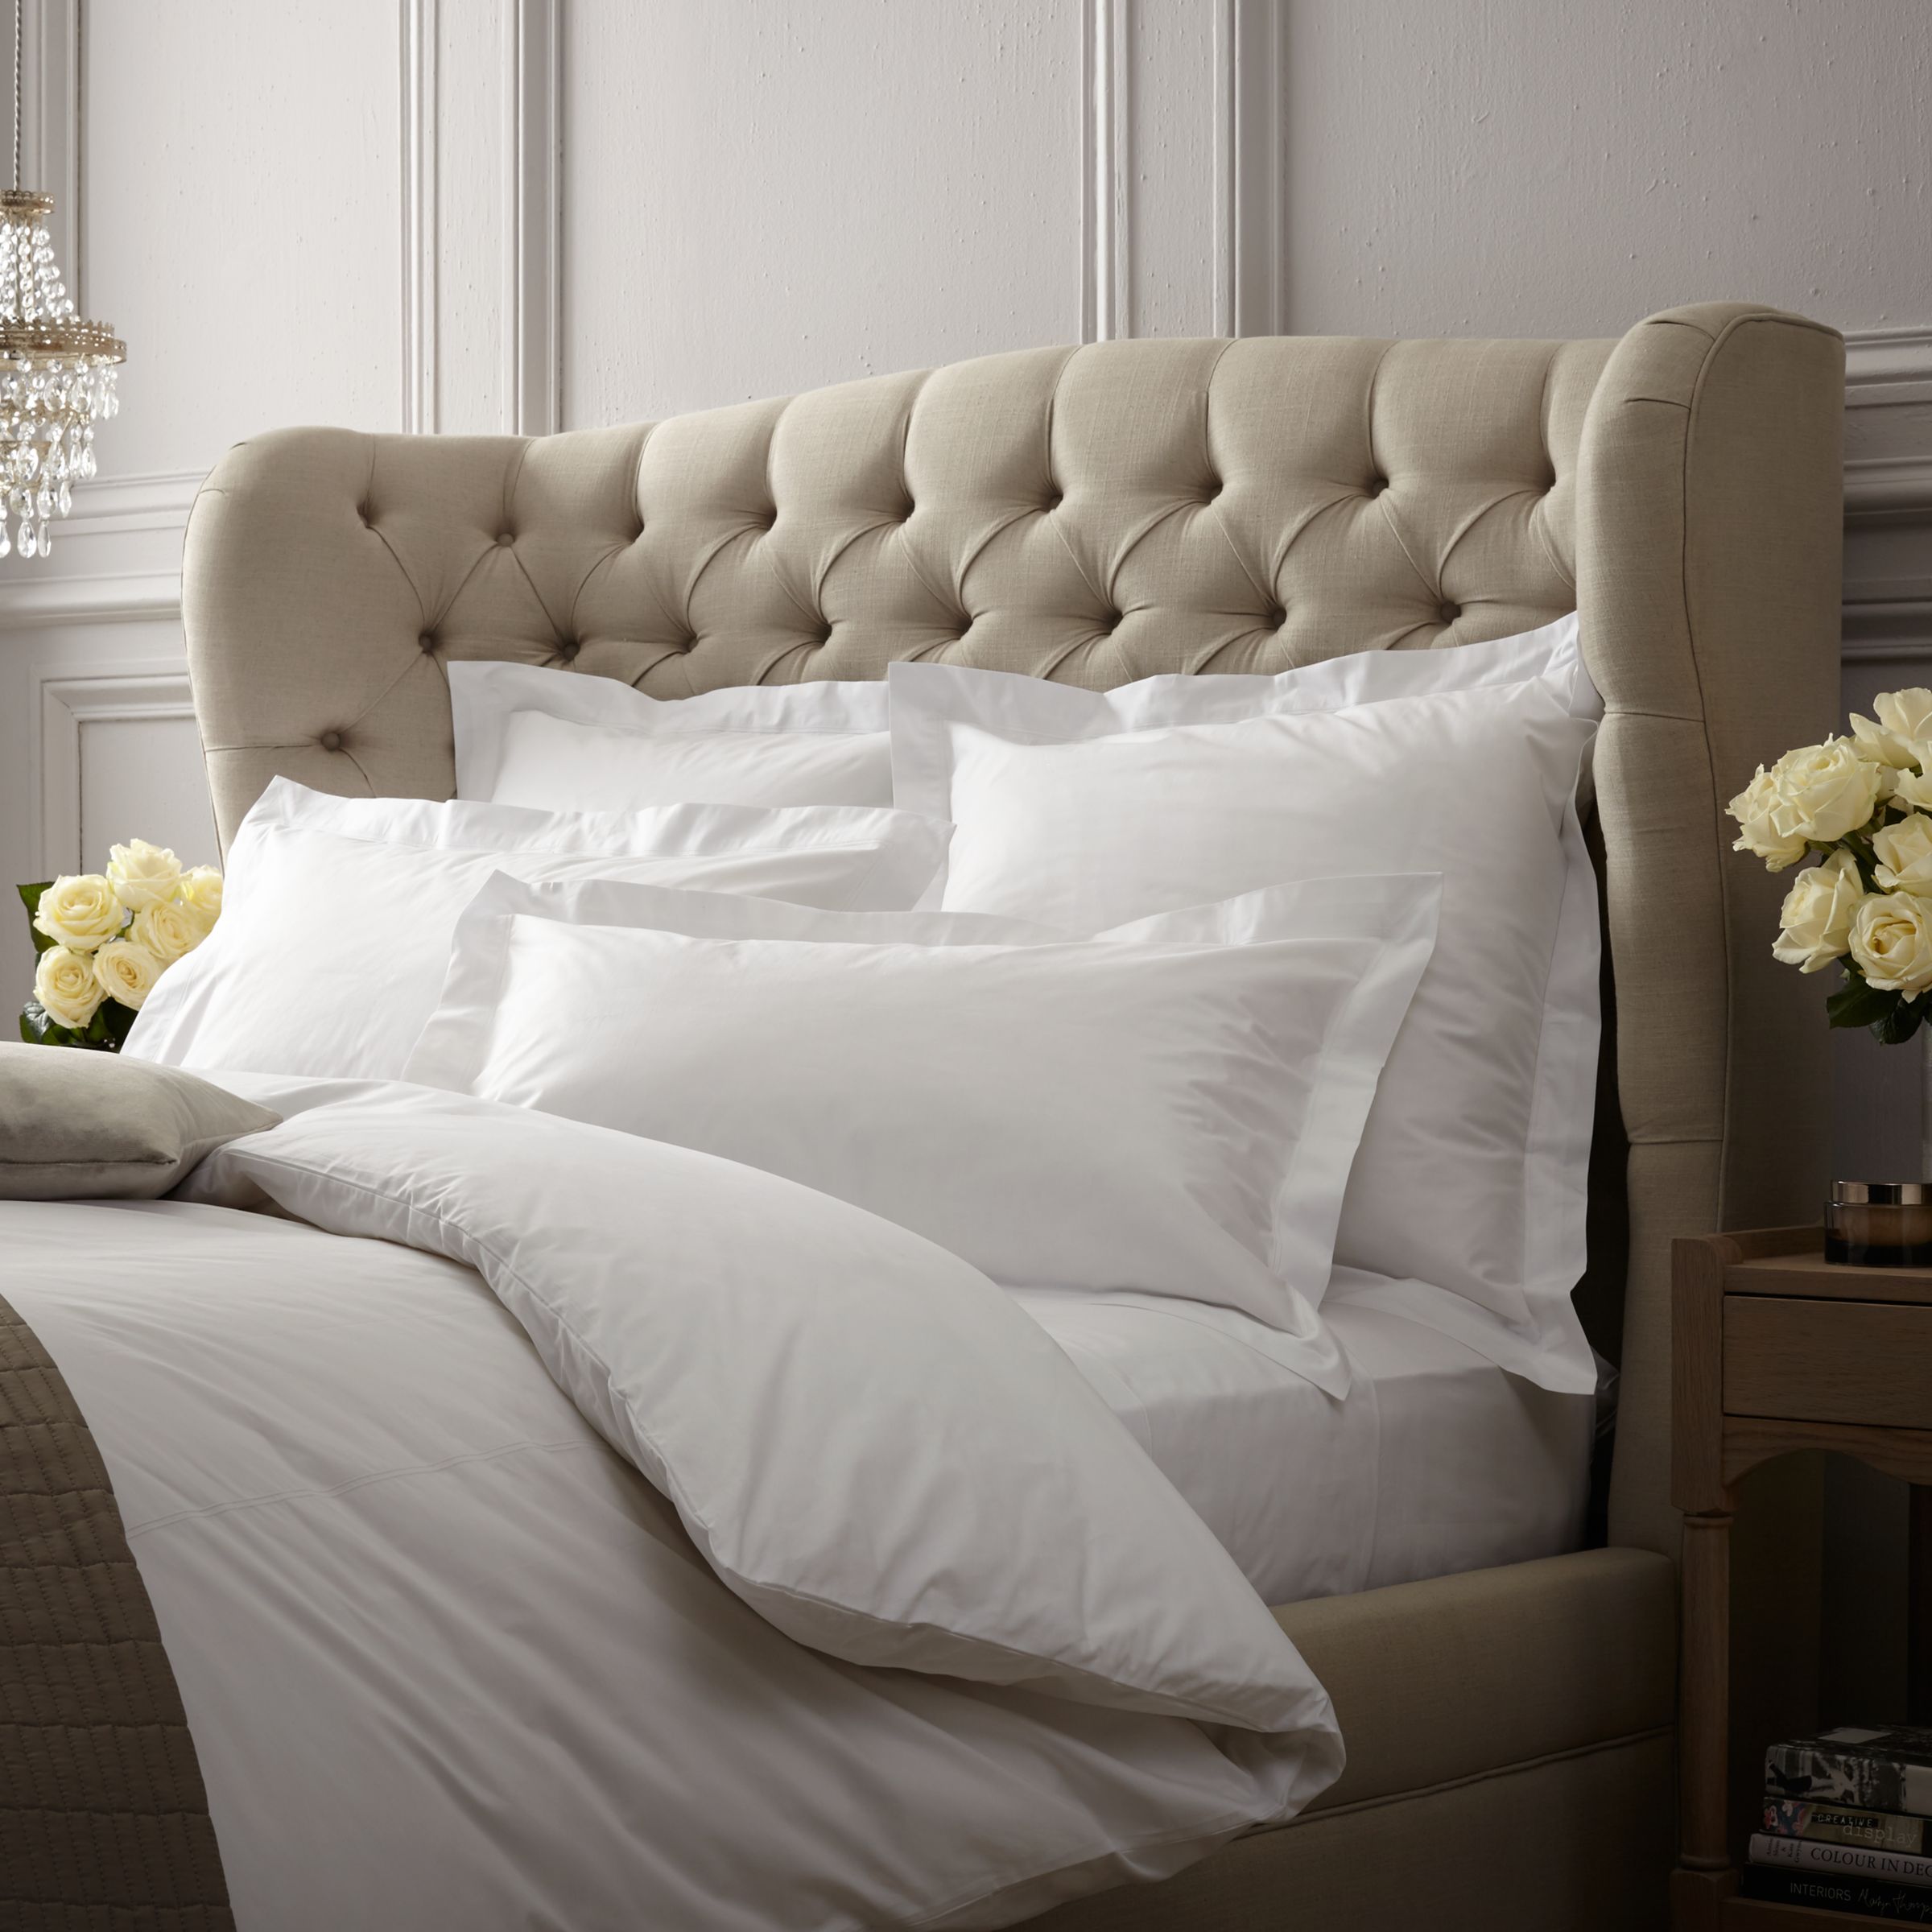 Peter Reed Egyptian Cotton 2 Row Cord Flat Sheets At John Lewis